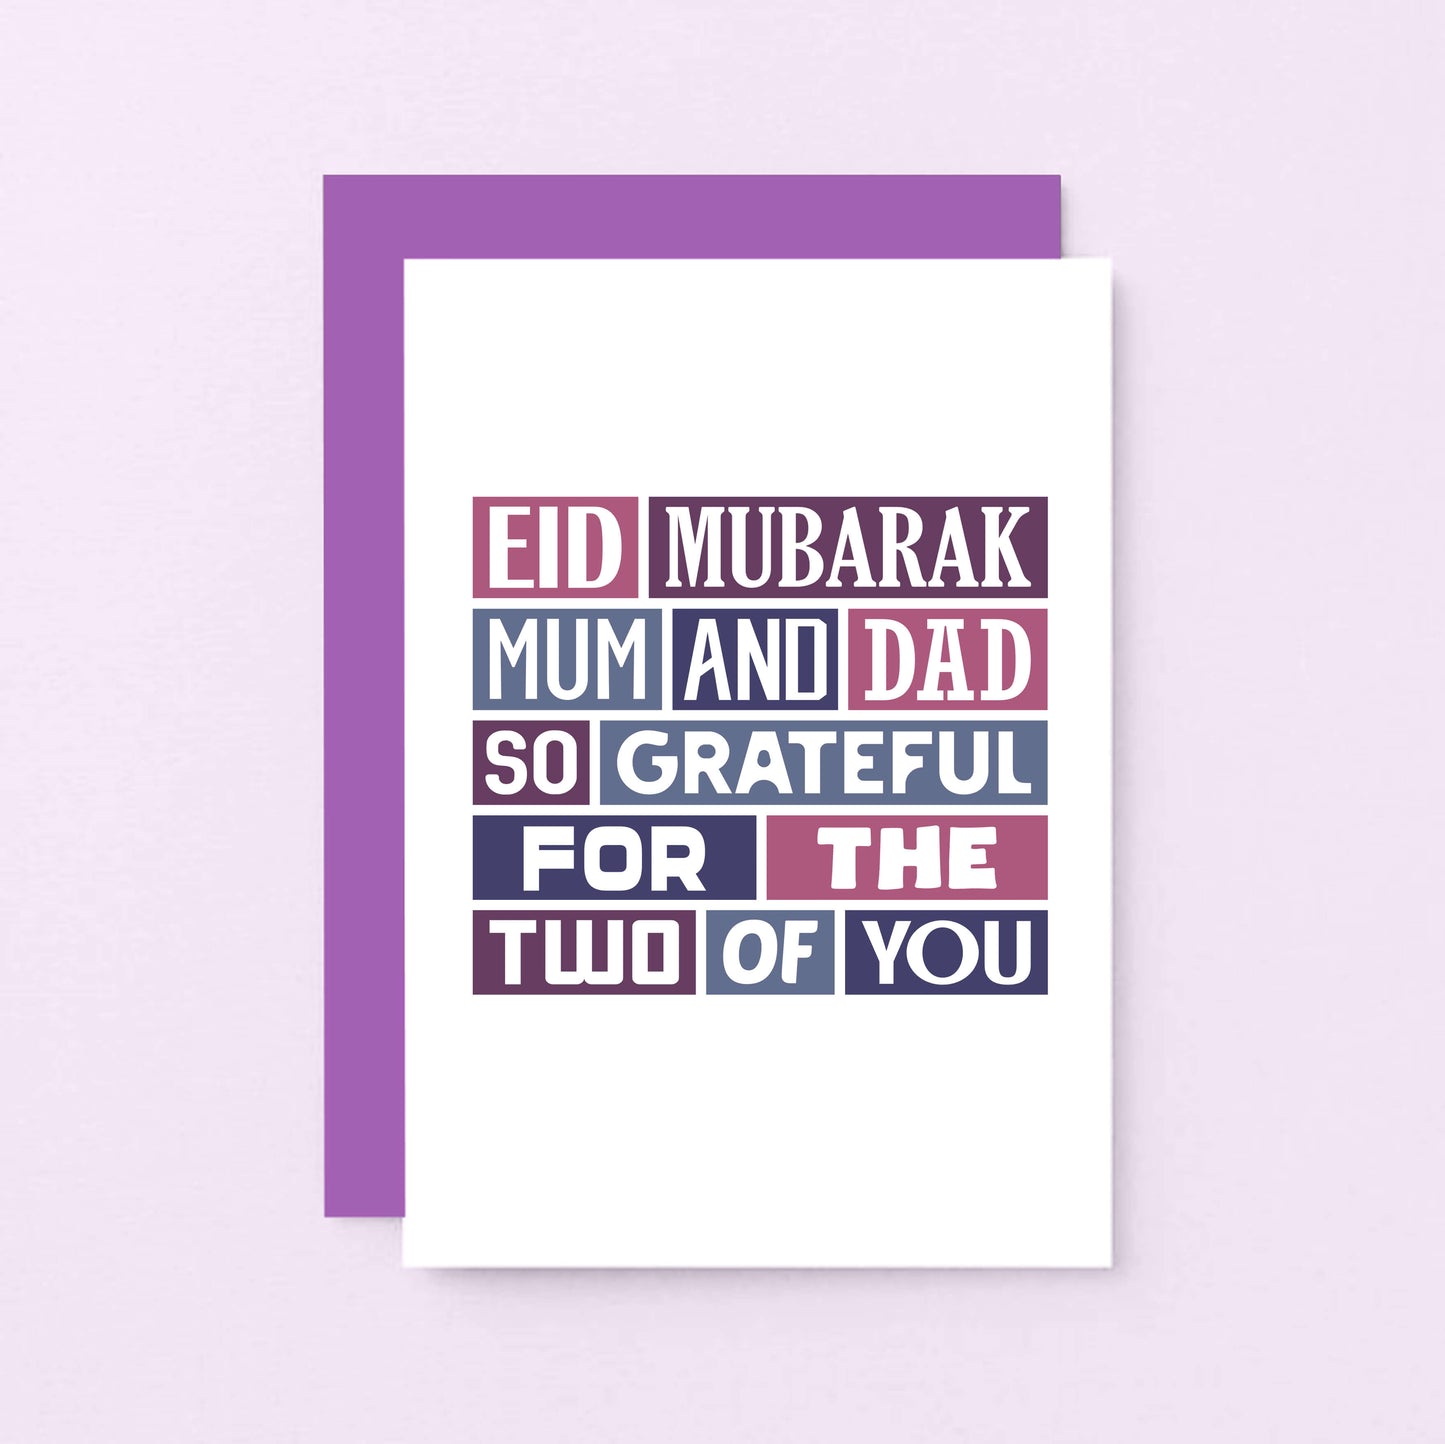 Eid Mubarak Card by SixElevenCreations. Reads Eid Mubarak Mum and Dad. So grateful for the two of you. Product Code SEH0013A6